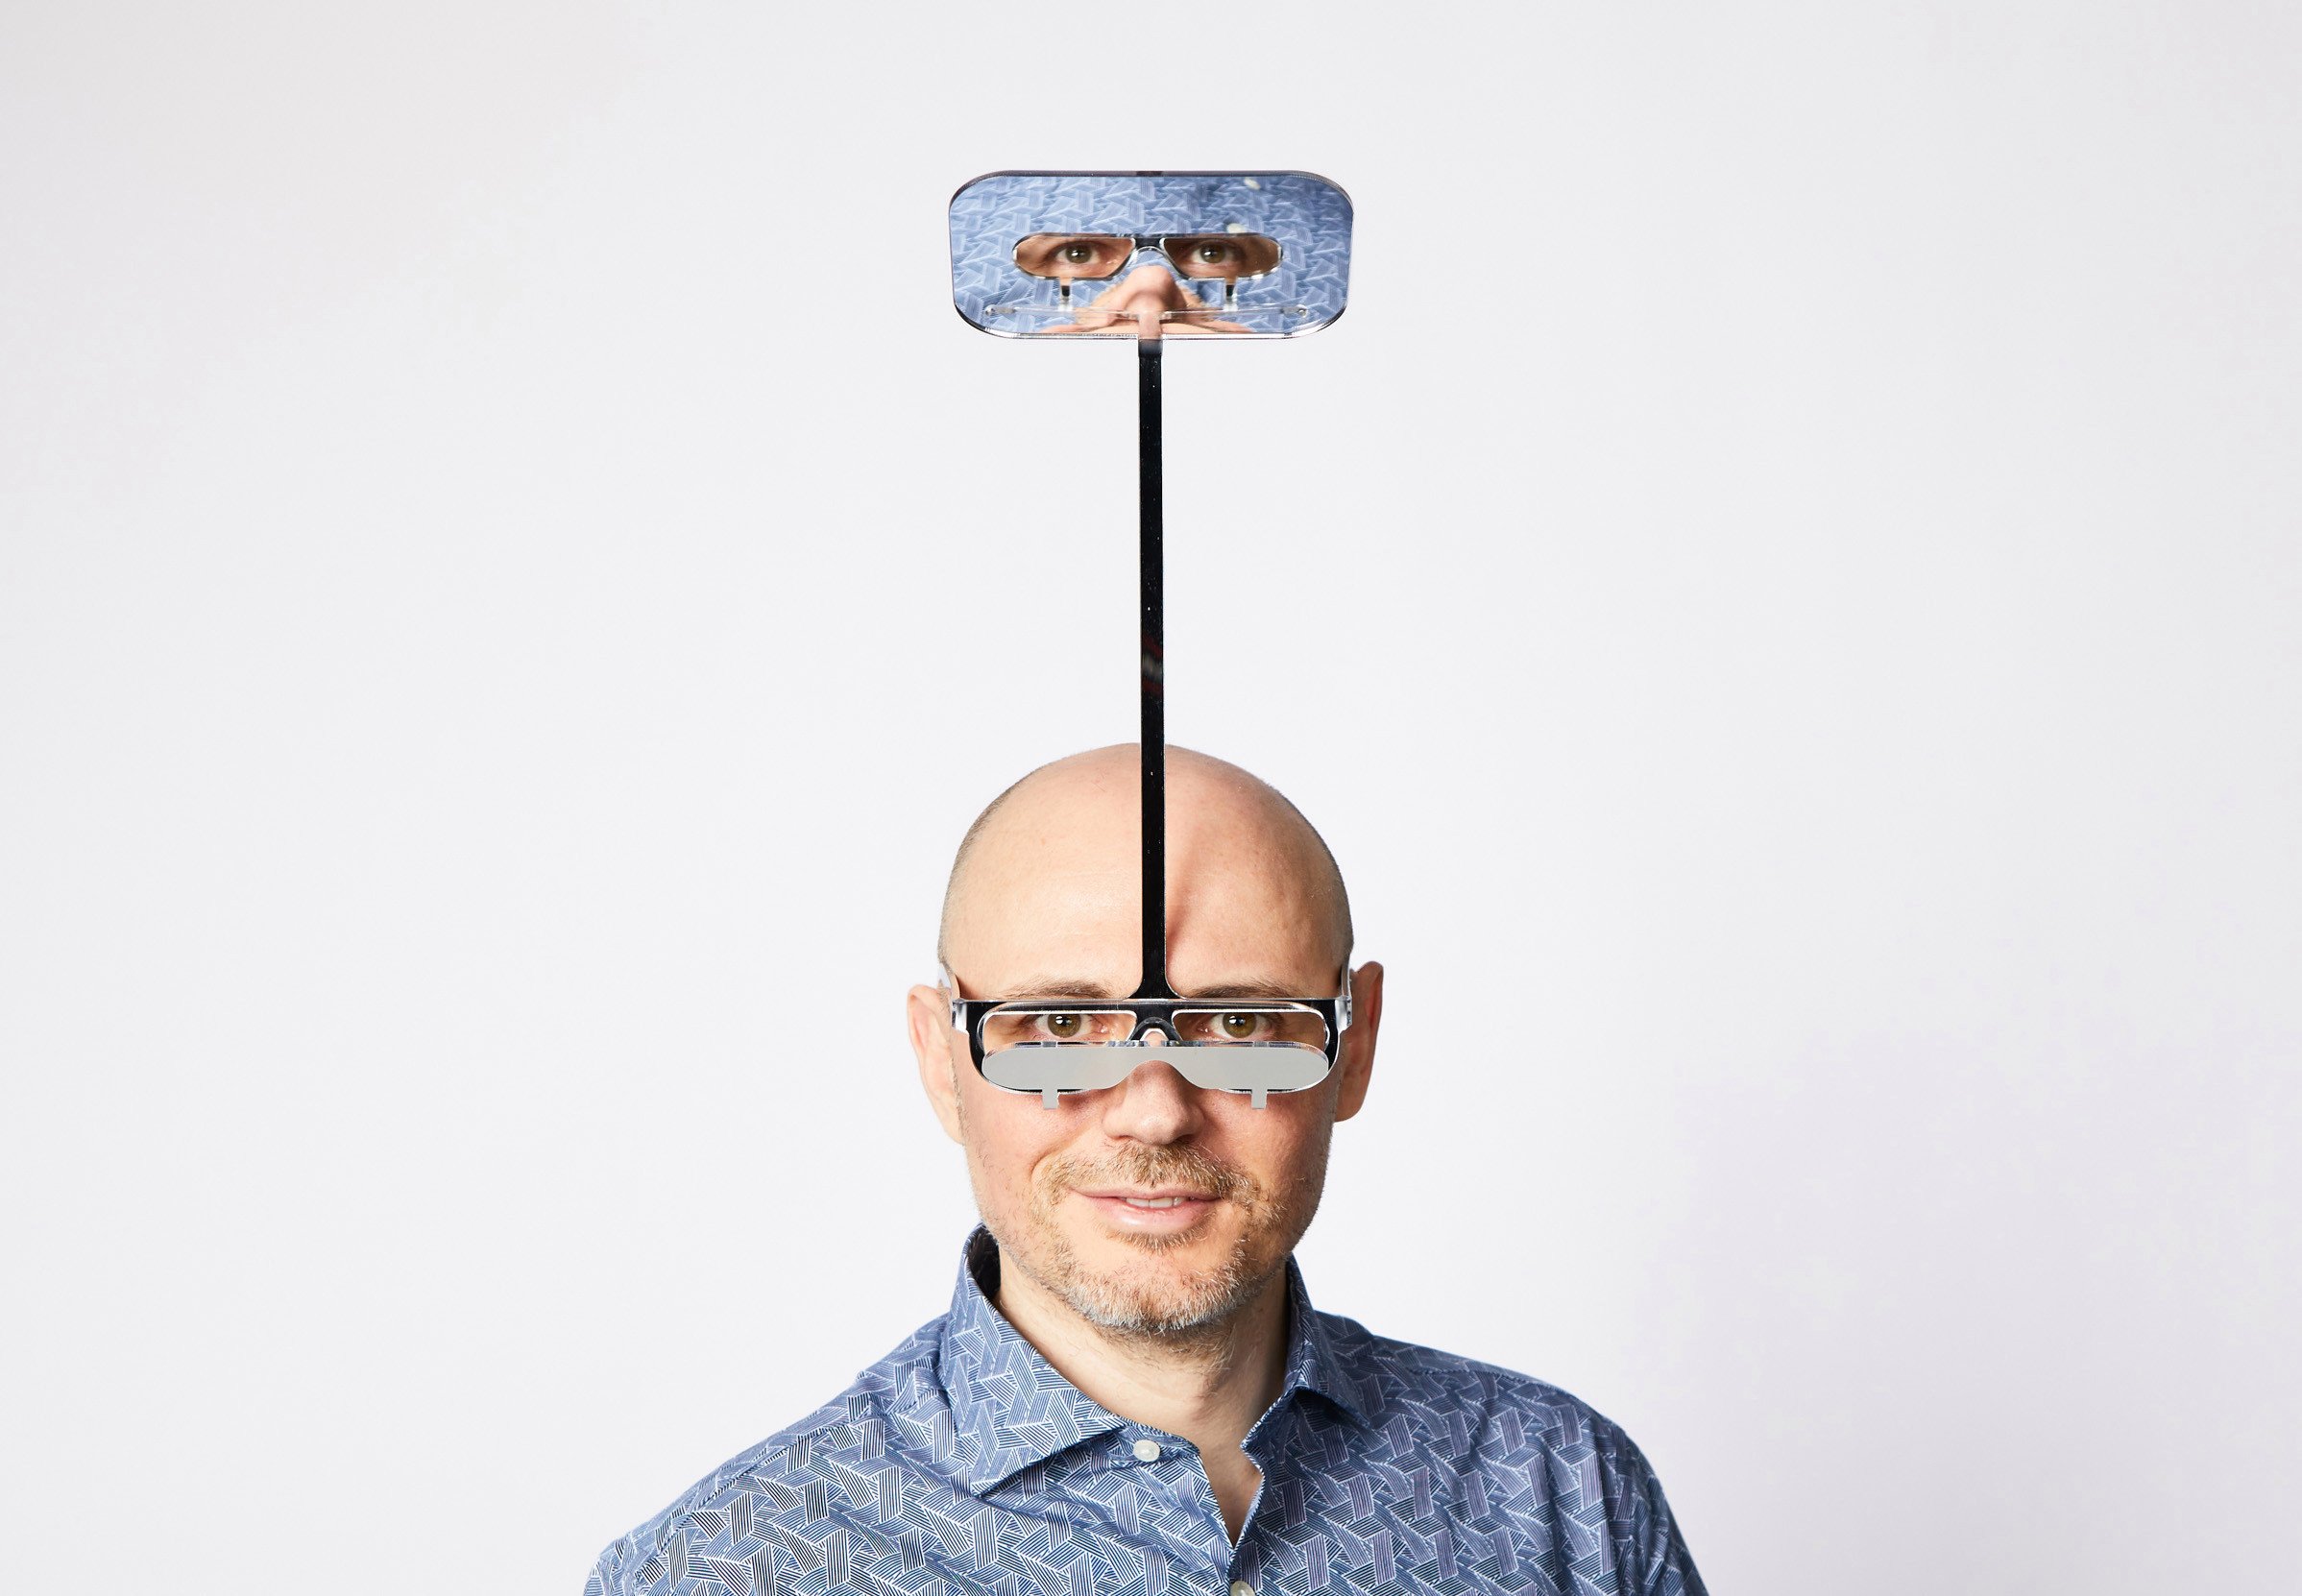  London-based designer Dominic Wilcox has created the One Foot Taller glasses for people who are too short at gigs